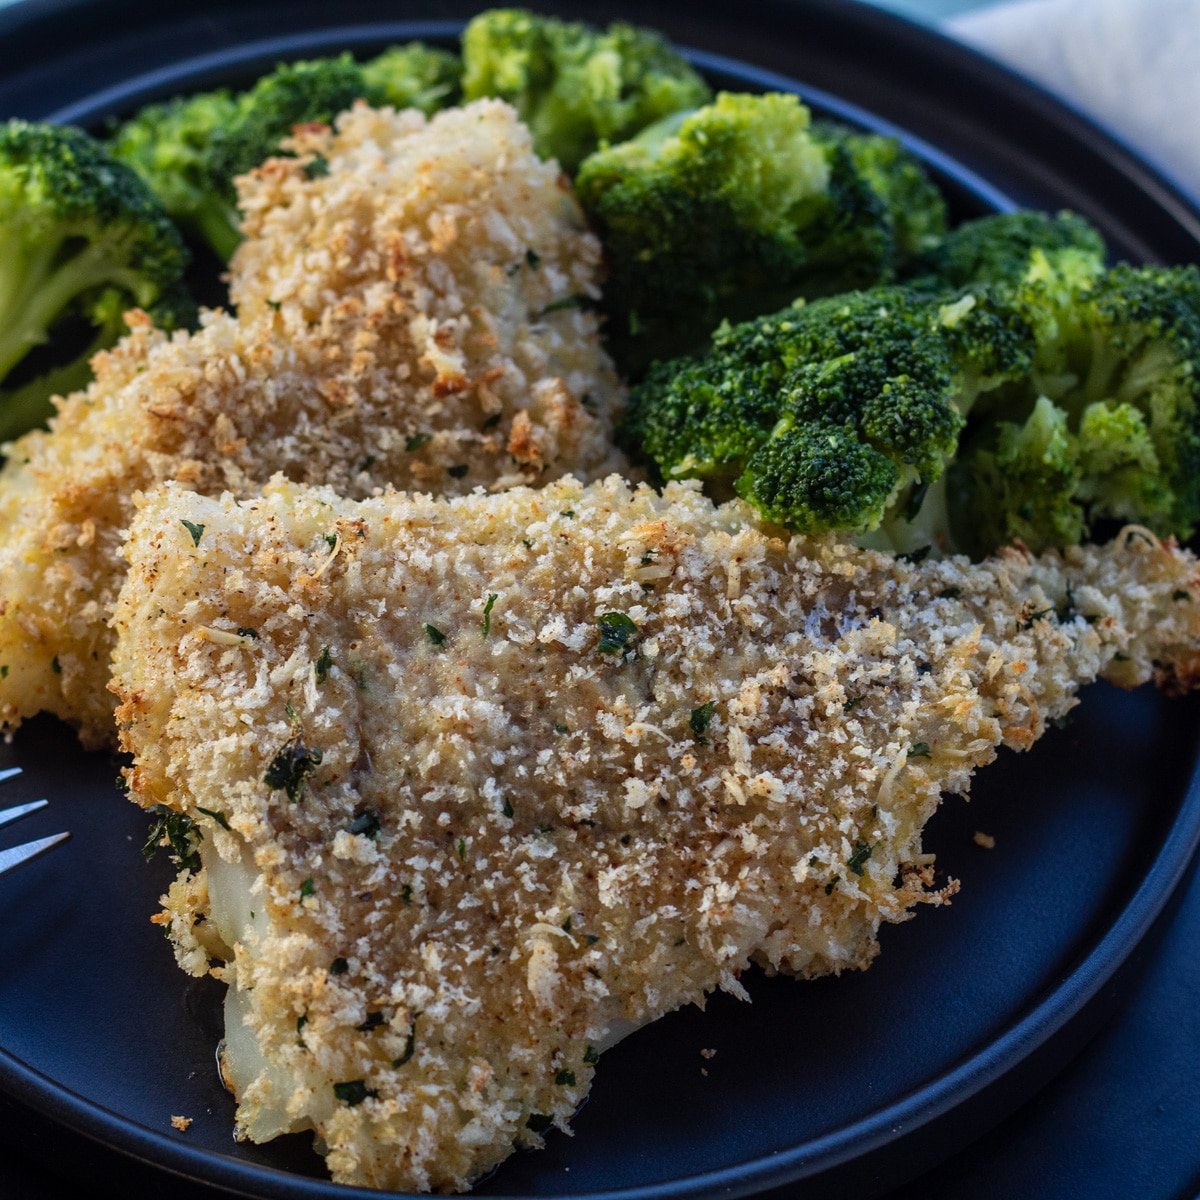 Panko baked cod served with broccoli on black plate.